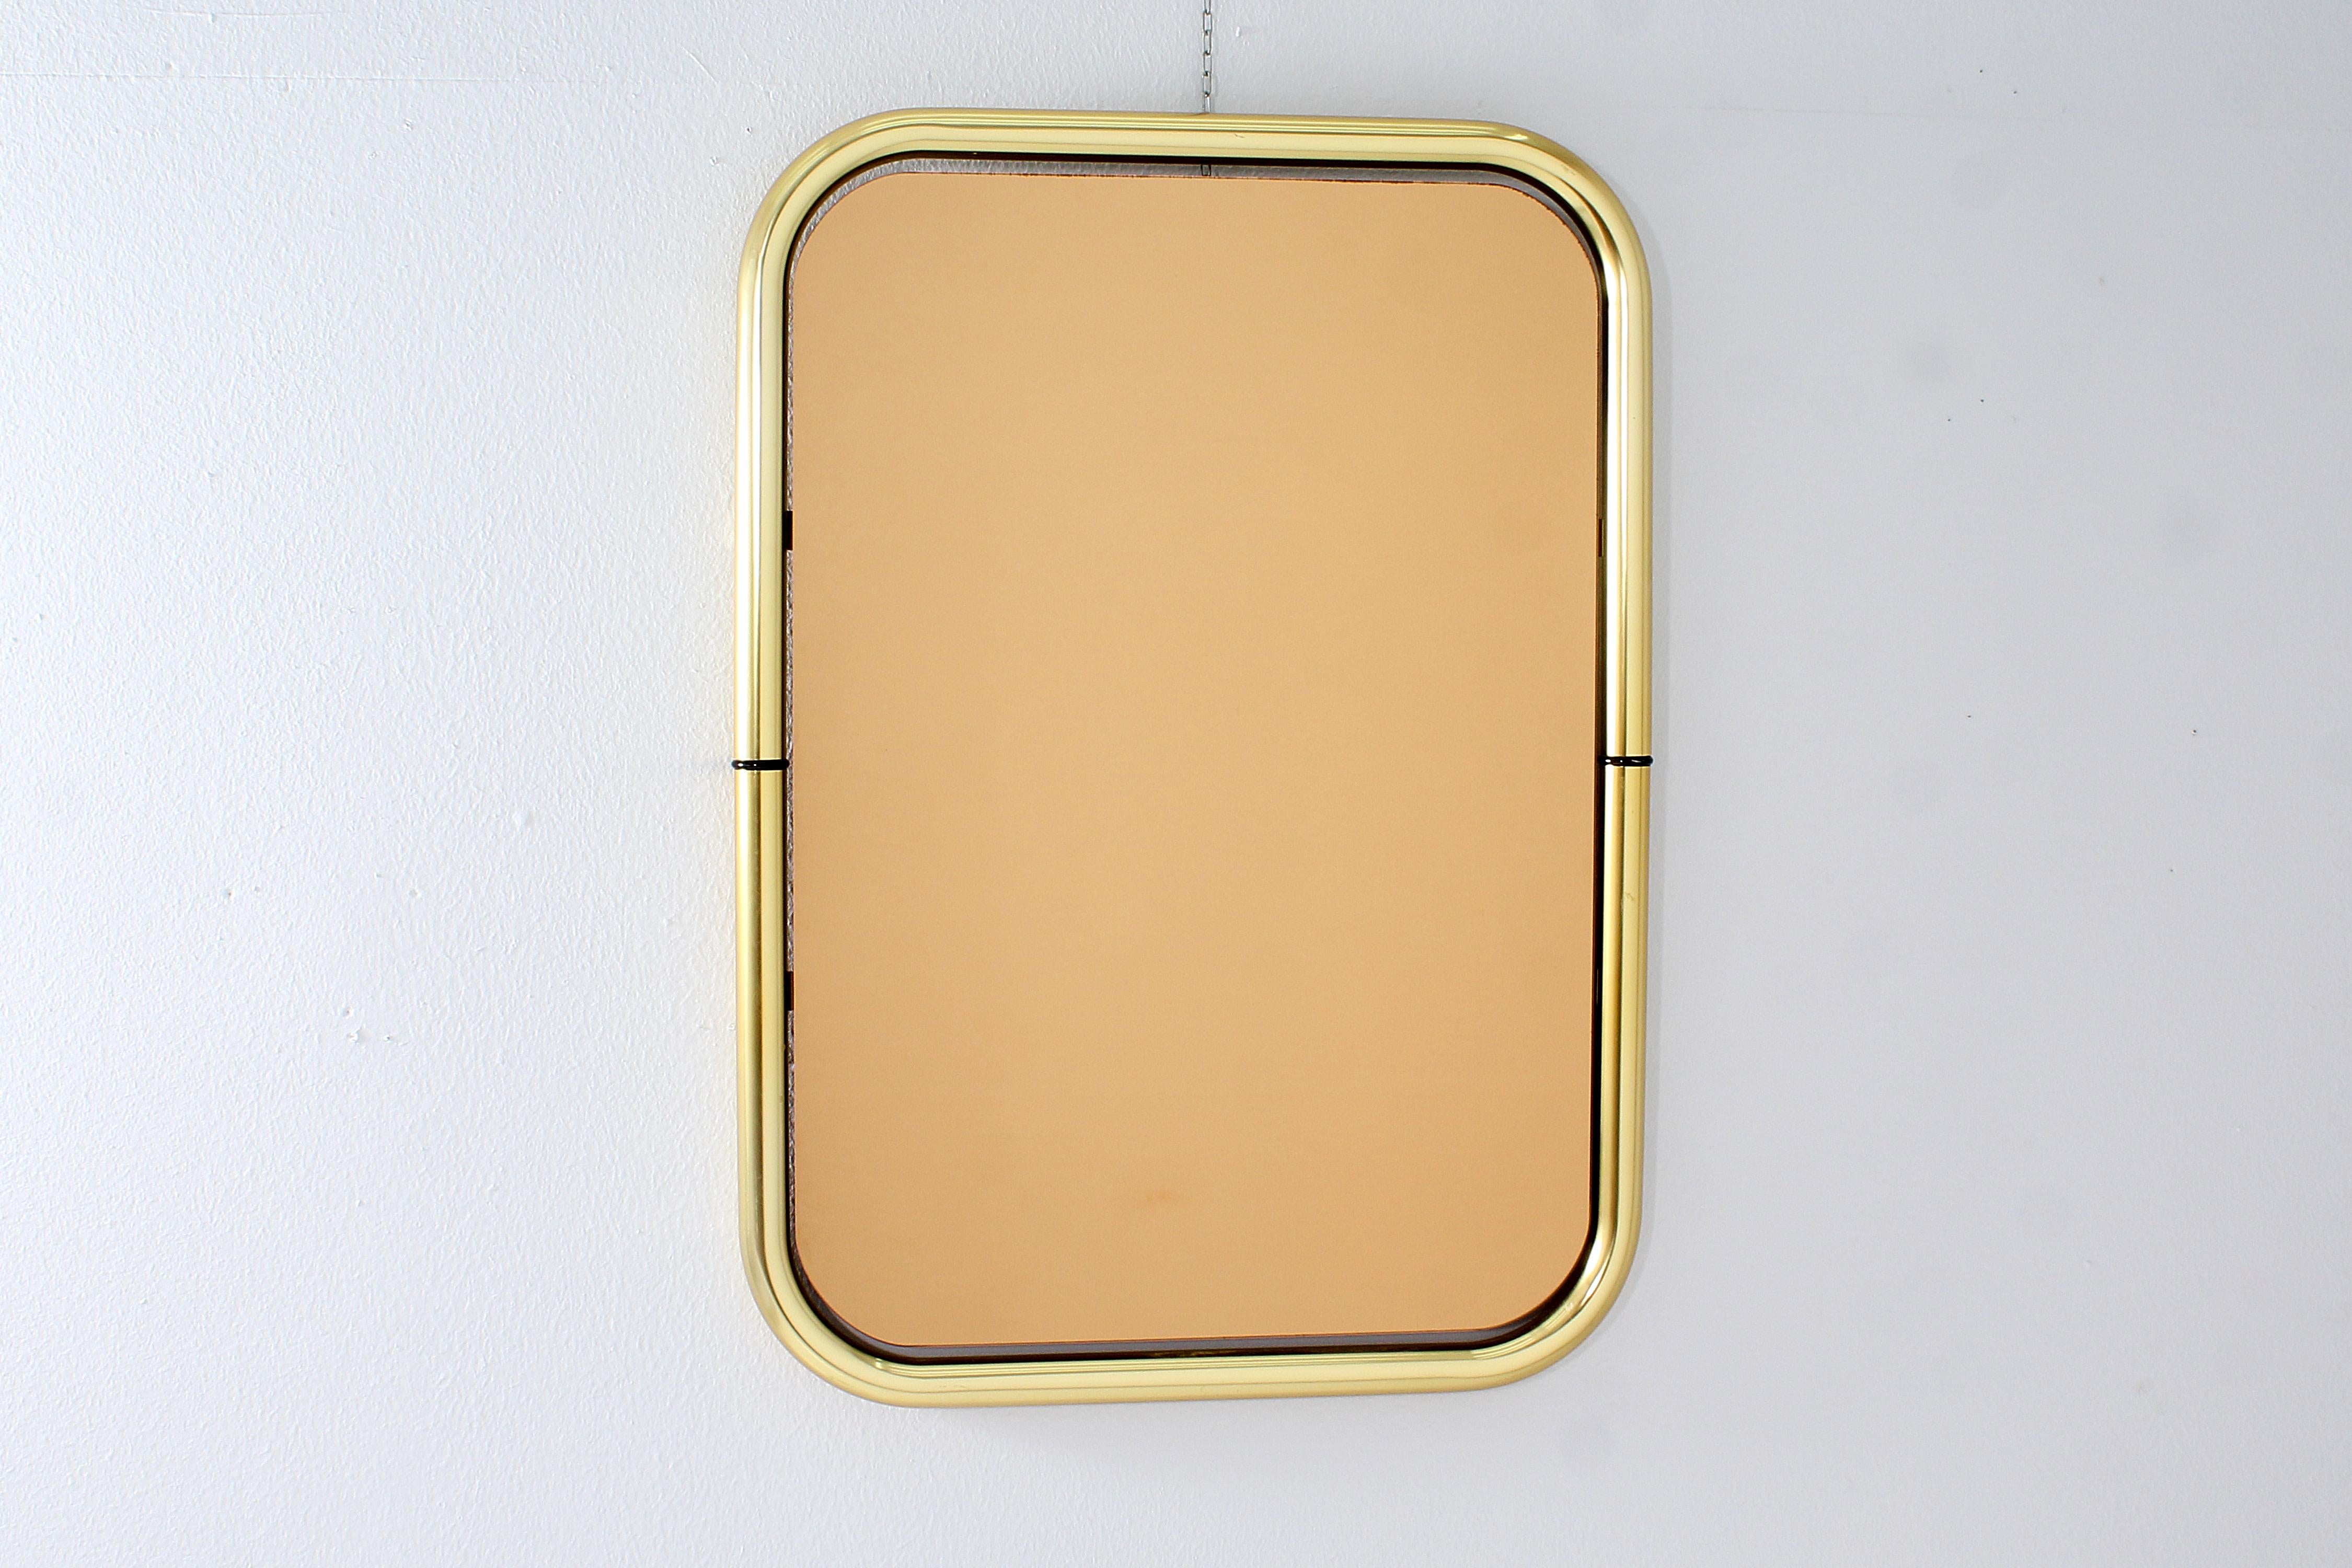 Very elegant rectangular wall mirror in solid brass and pink glass, designed and produced in Italy in the 1970s by Cristal Art Torino.
Wear consistent with age and use.